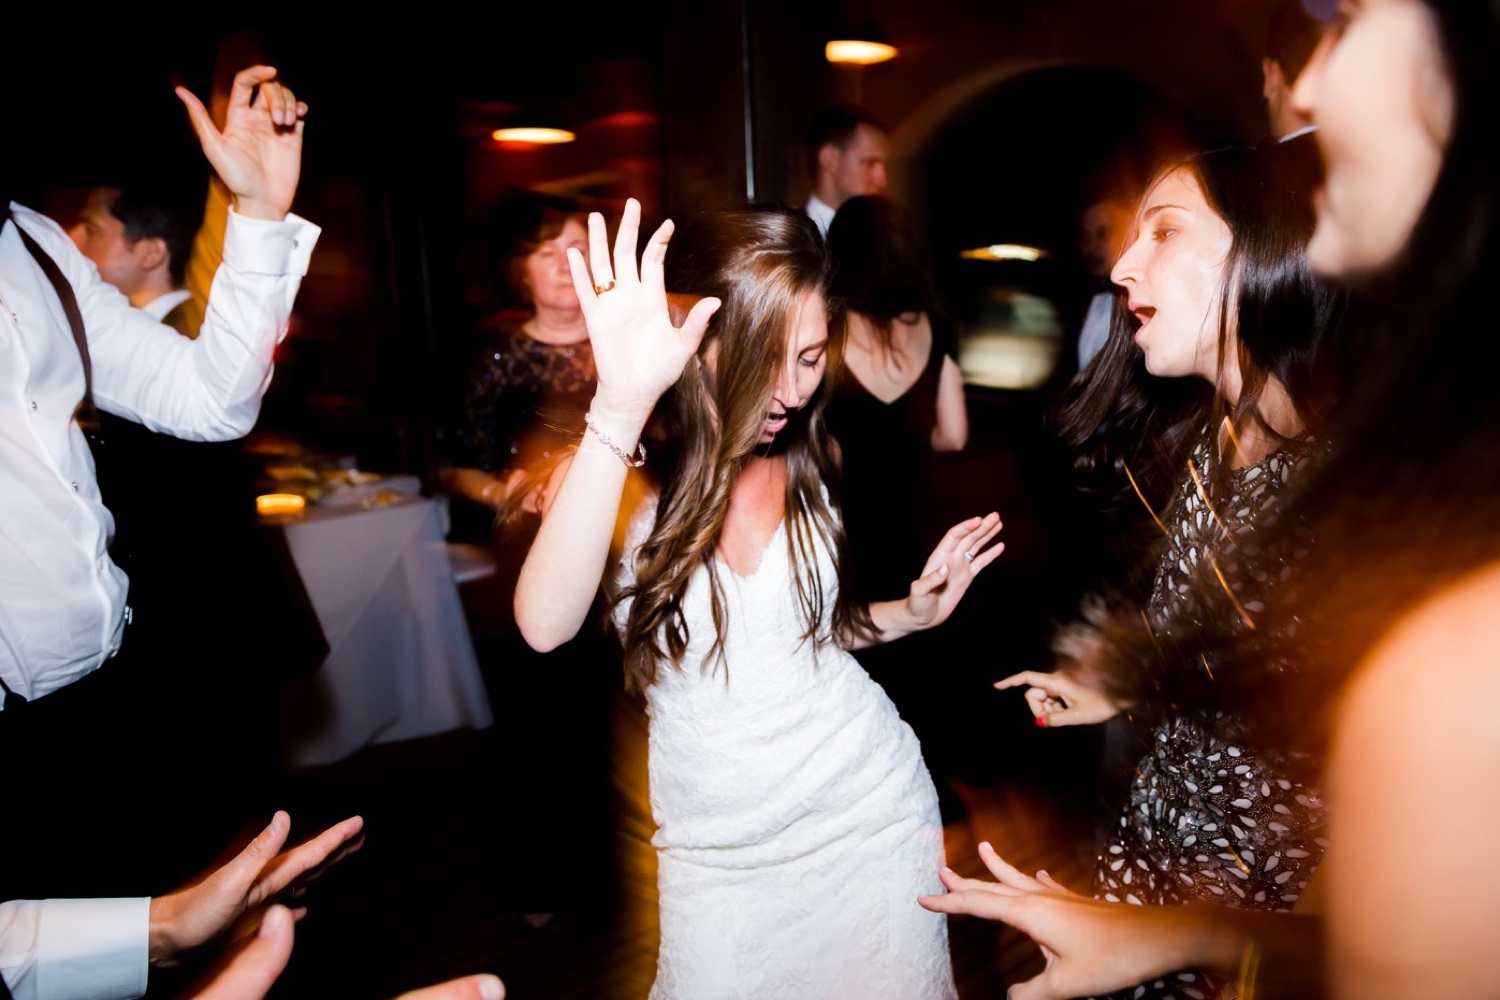 A newly wedded bride dancing together during a wedding reception at Liberty Warehouse, Brooklyn New York. 